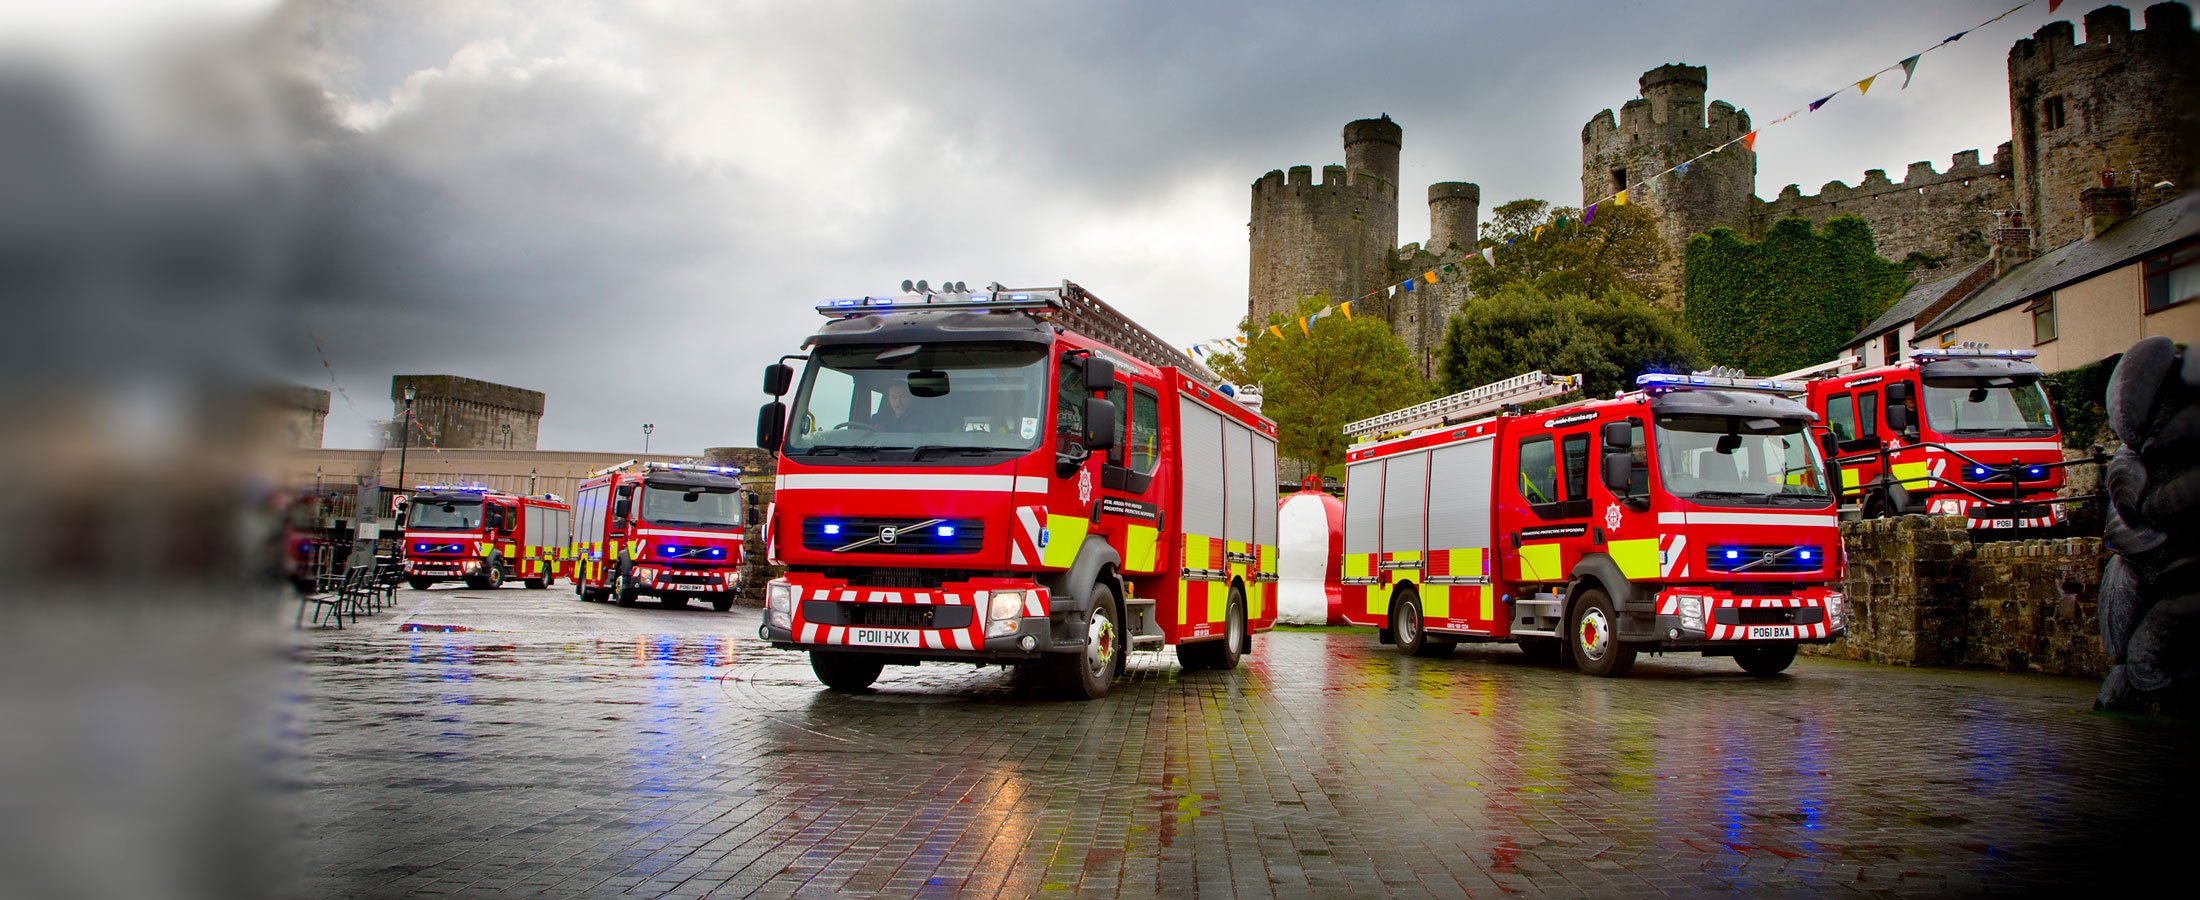 North Wales Fire & Rescue Service chooses SaaS - TechnologyOne